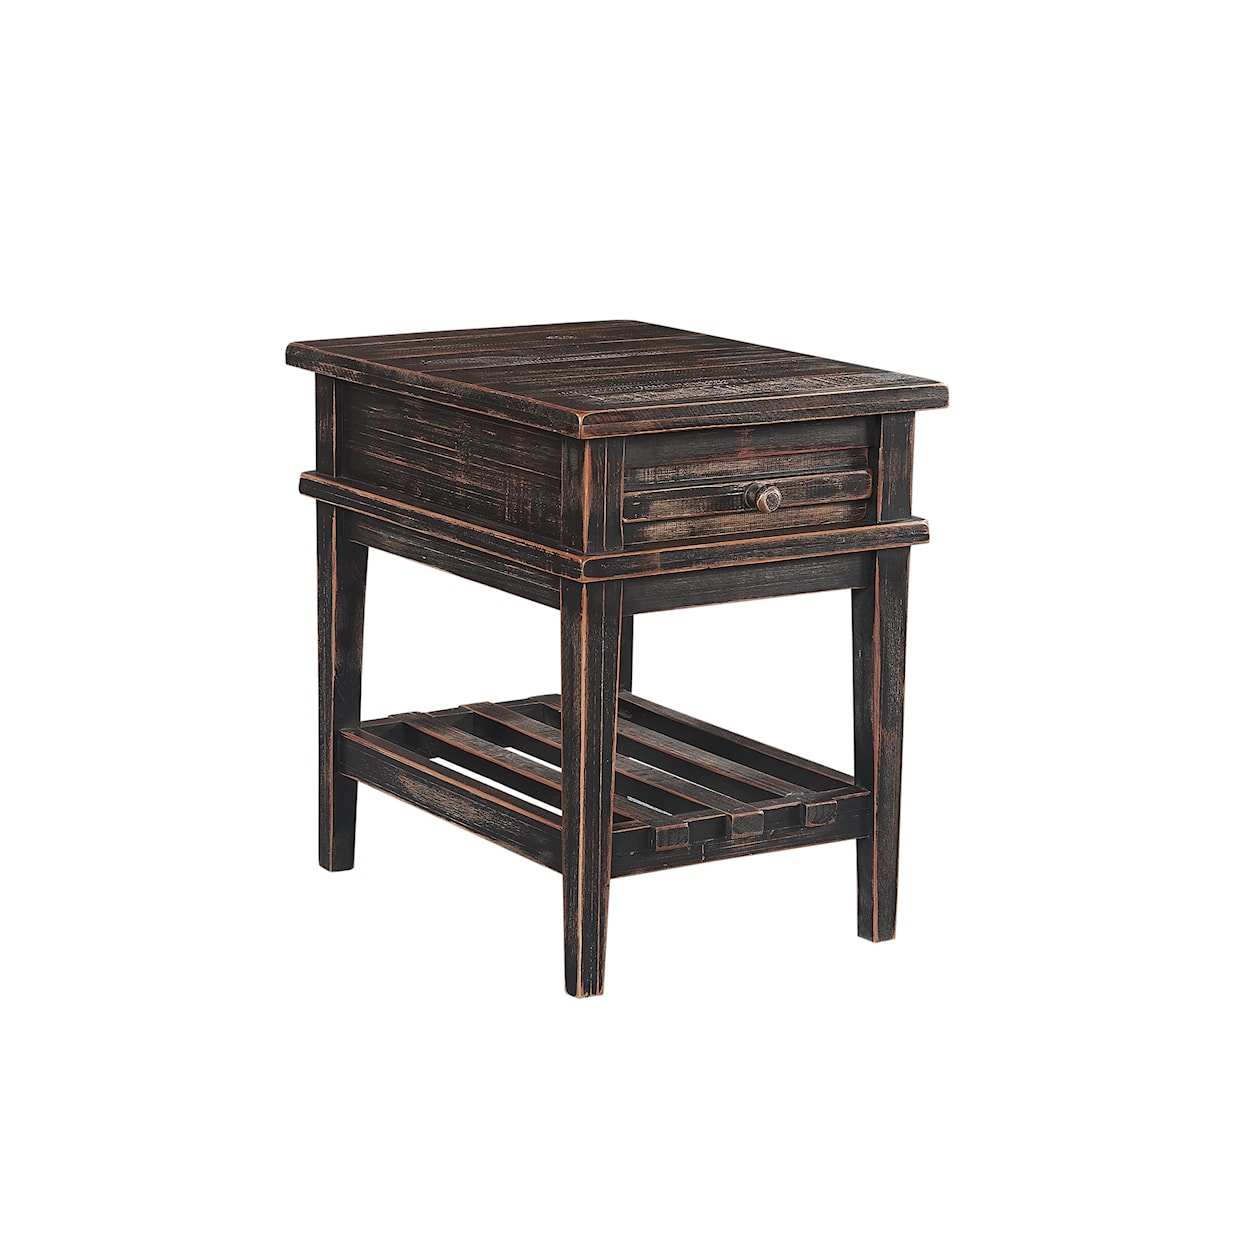 Aspenhome Reeds Farm Chairside Table